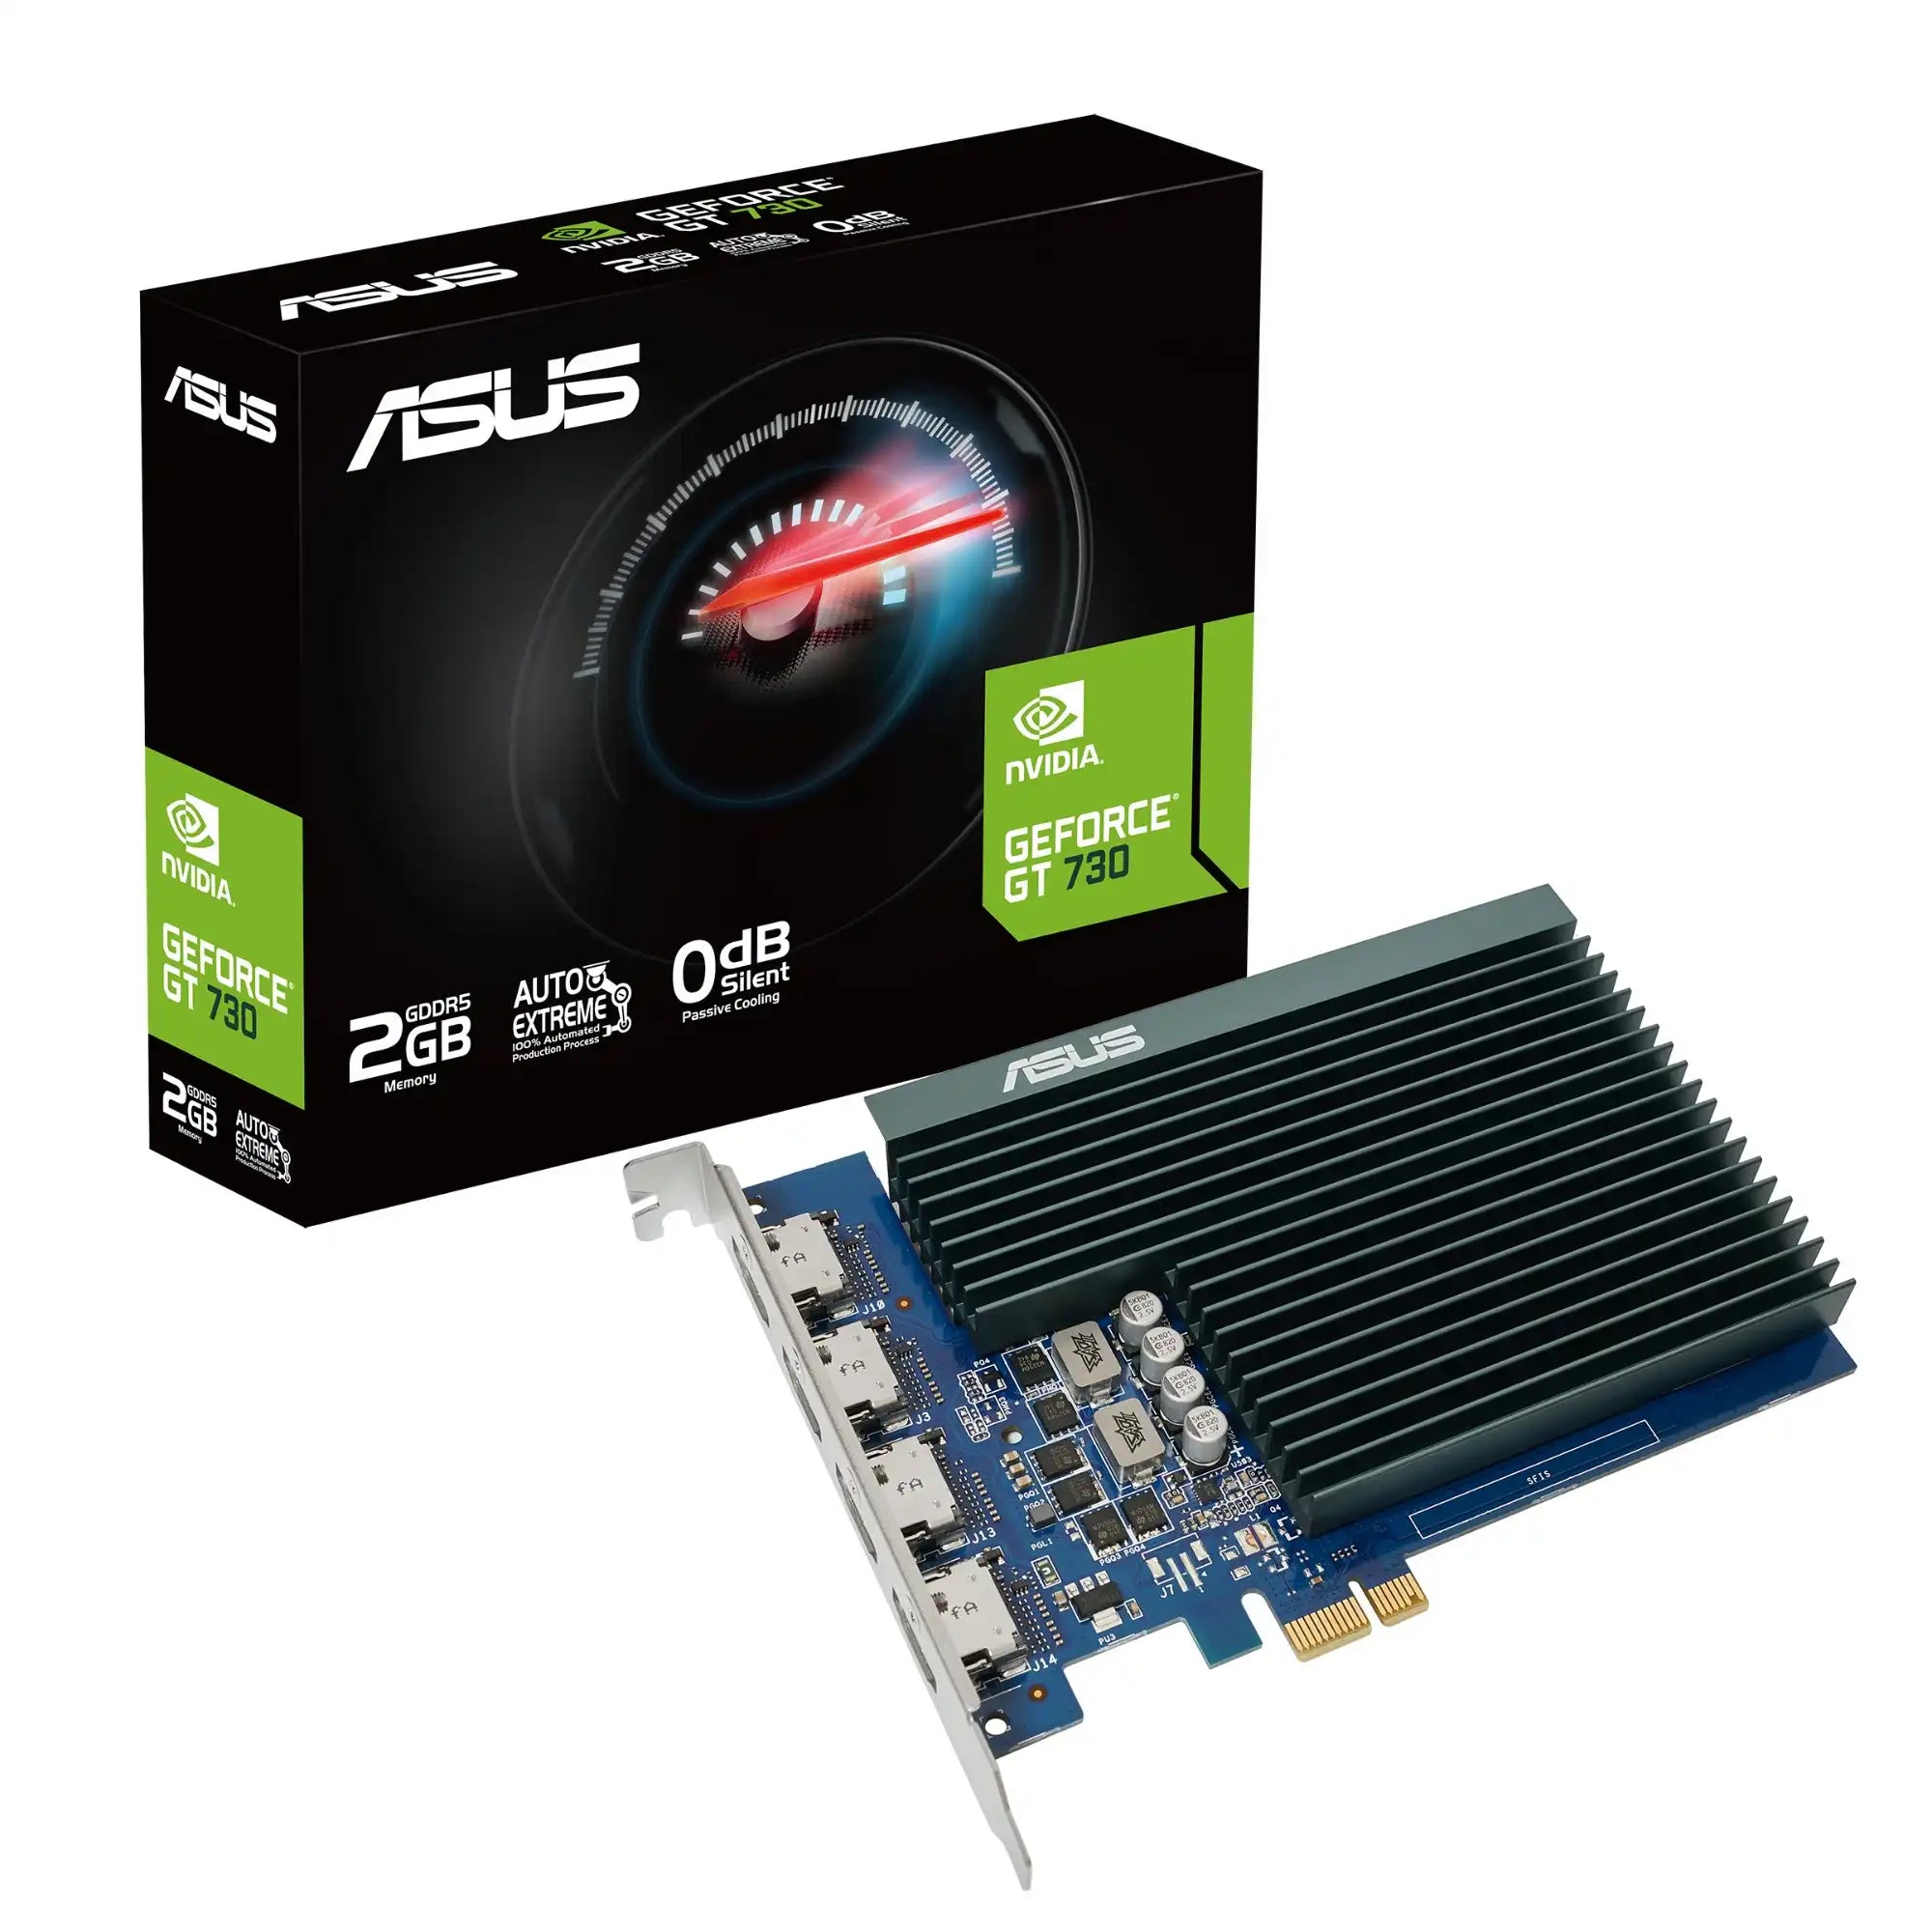 ASUS GeForce GT 730 Graphics Card | 90YV0H20-M0NA00 |